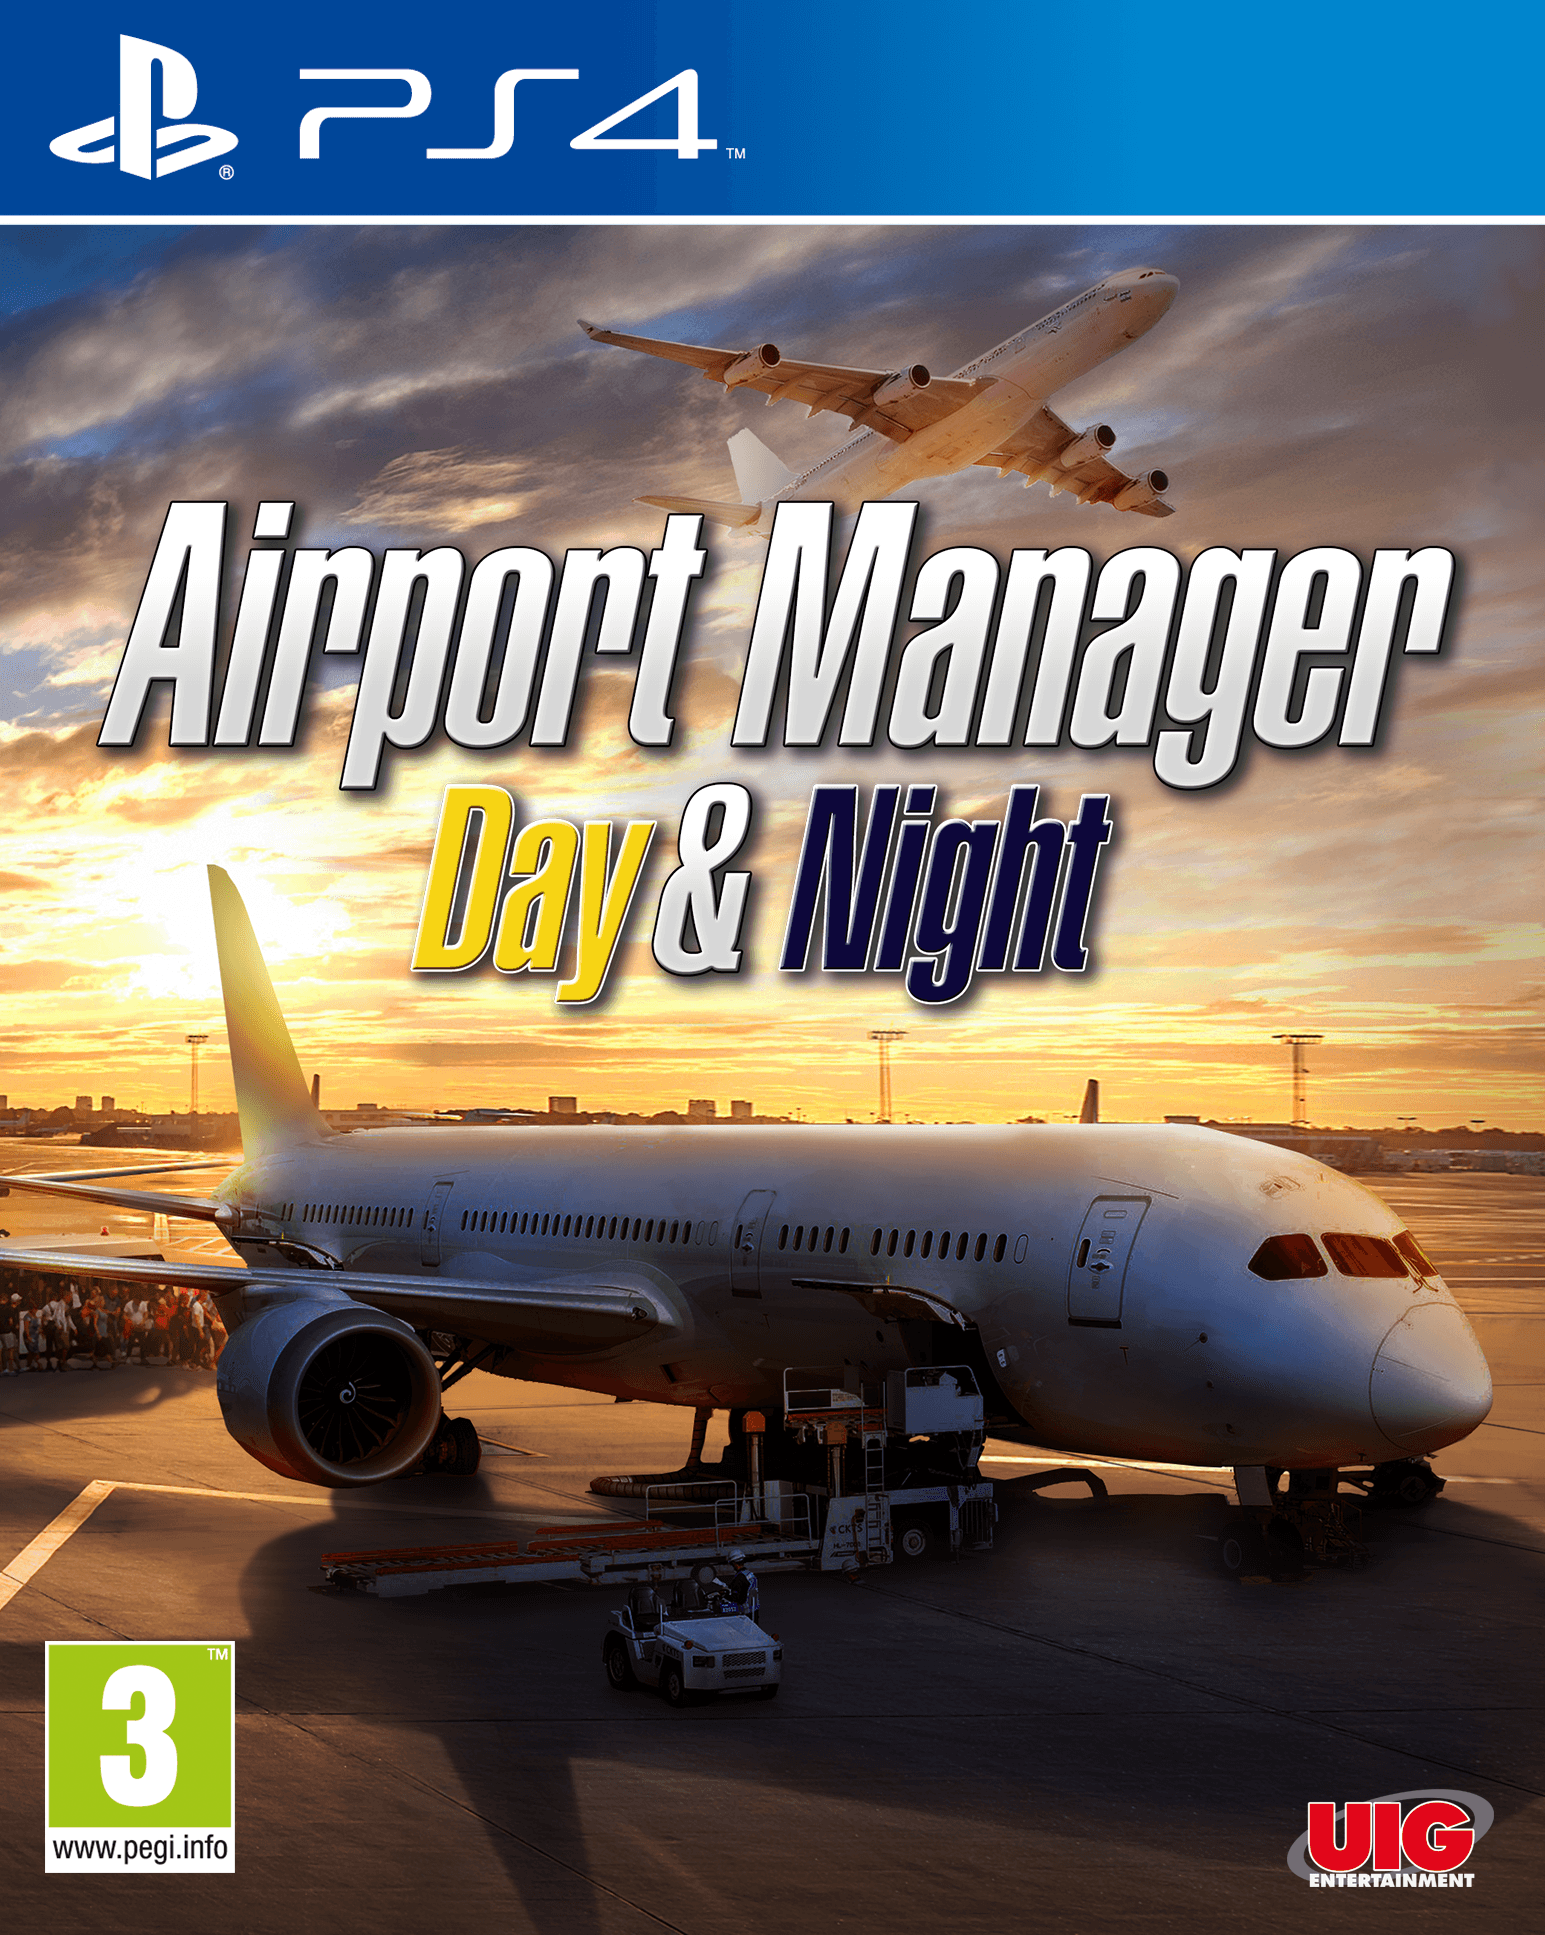 Airport Simulator Day & Night - Want a New Gadget